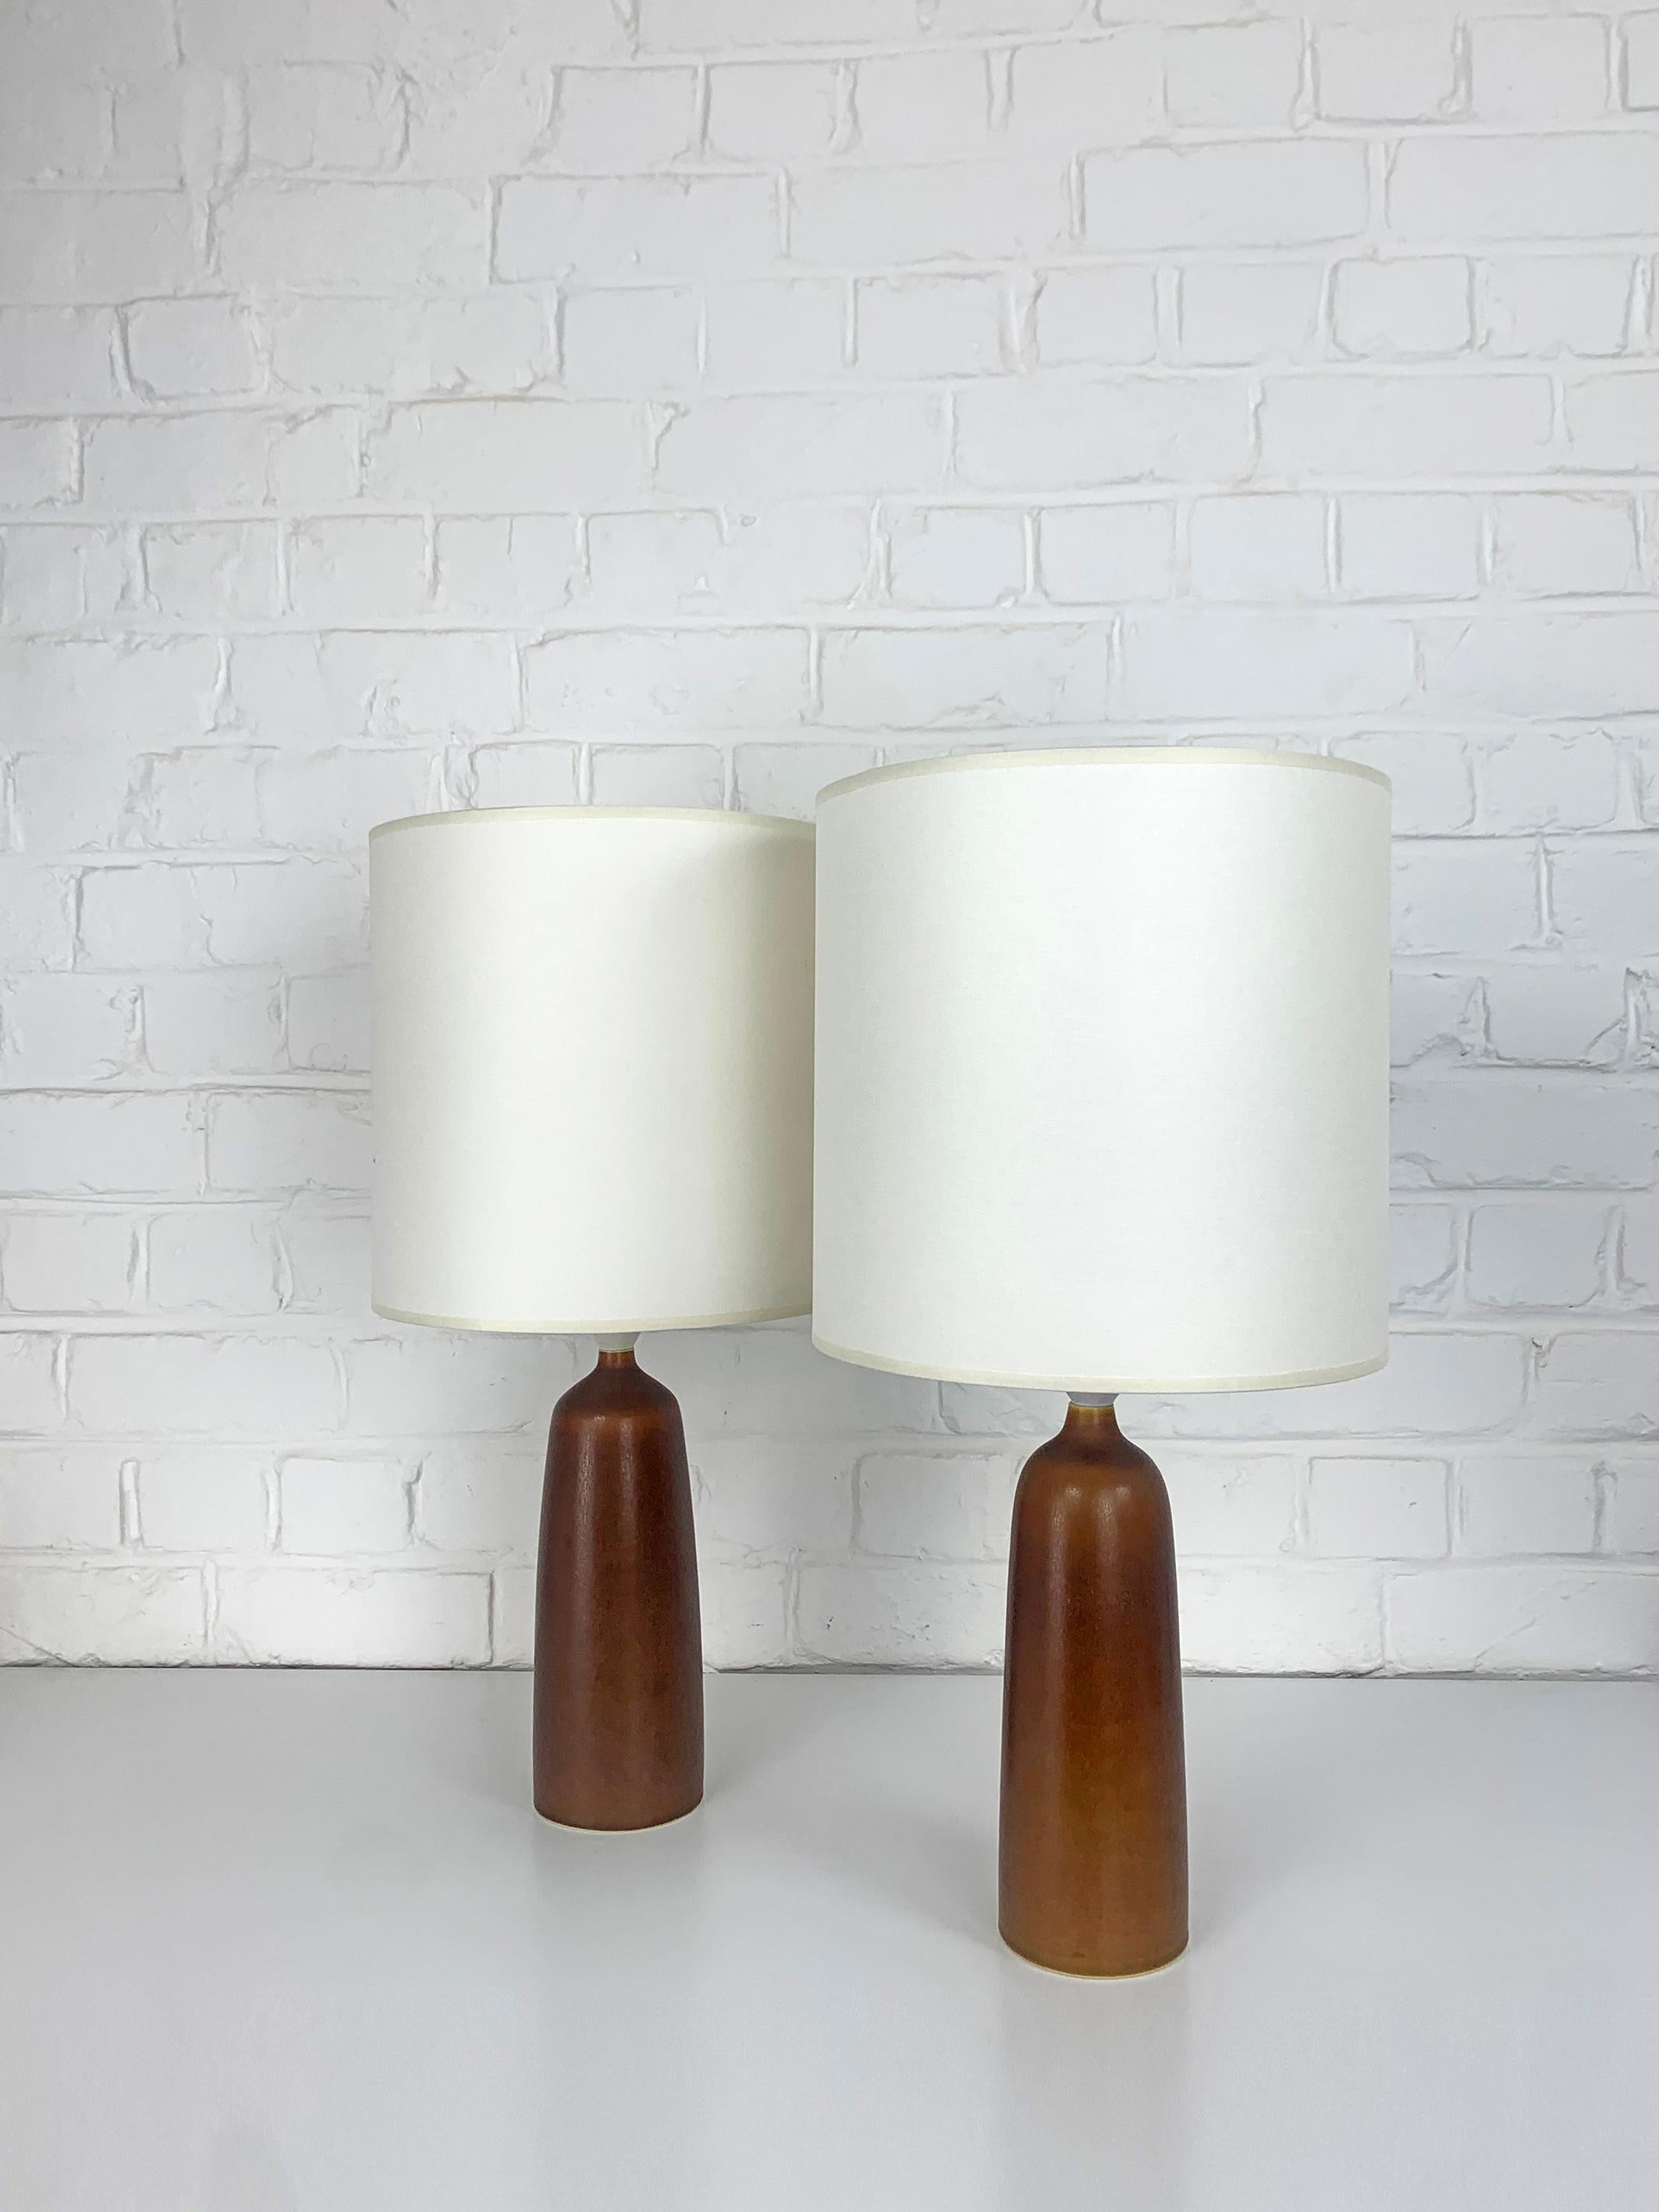 Pair caramel brown stoneware table lamps, model DL17, produced by Palshus (Denmark). 

Palshus has been founded by Per and his wife Annelise Linnemann-Schmidt. The couple created and produced chamotte (danish clay) objects (tableware, vases, and